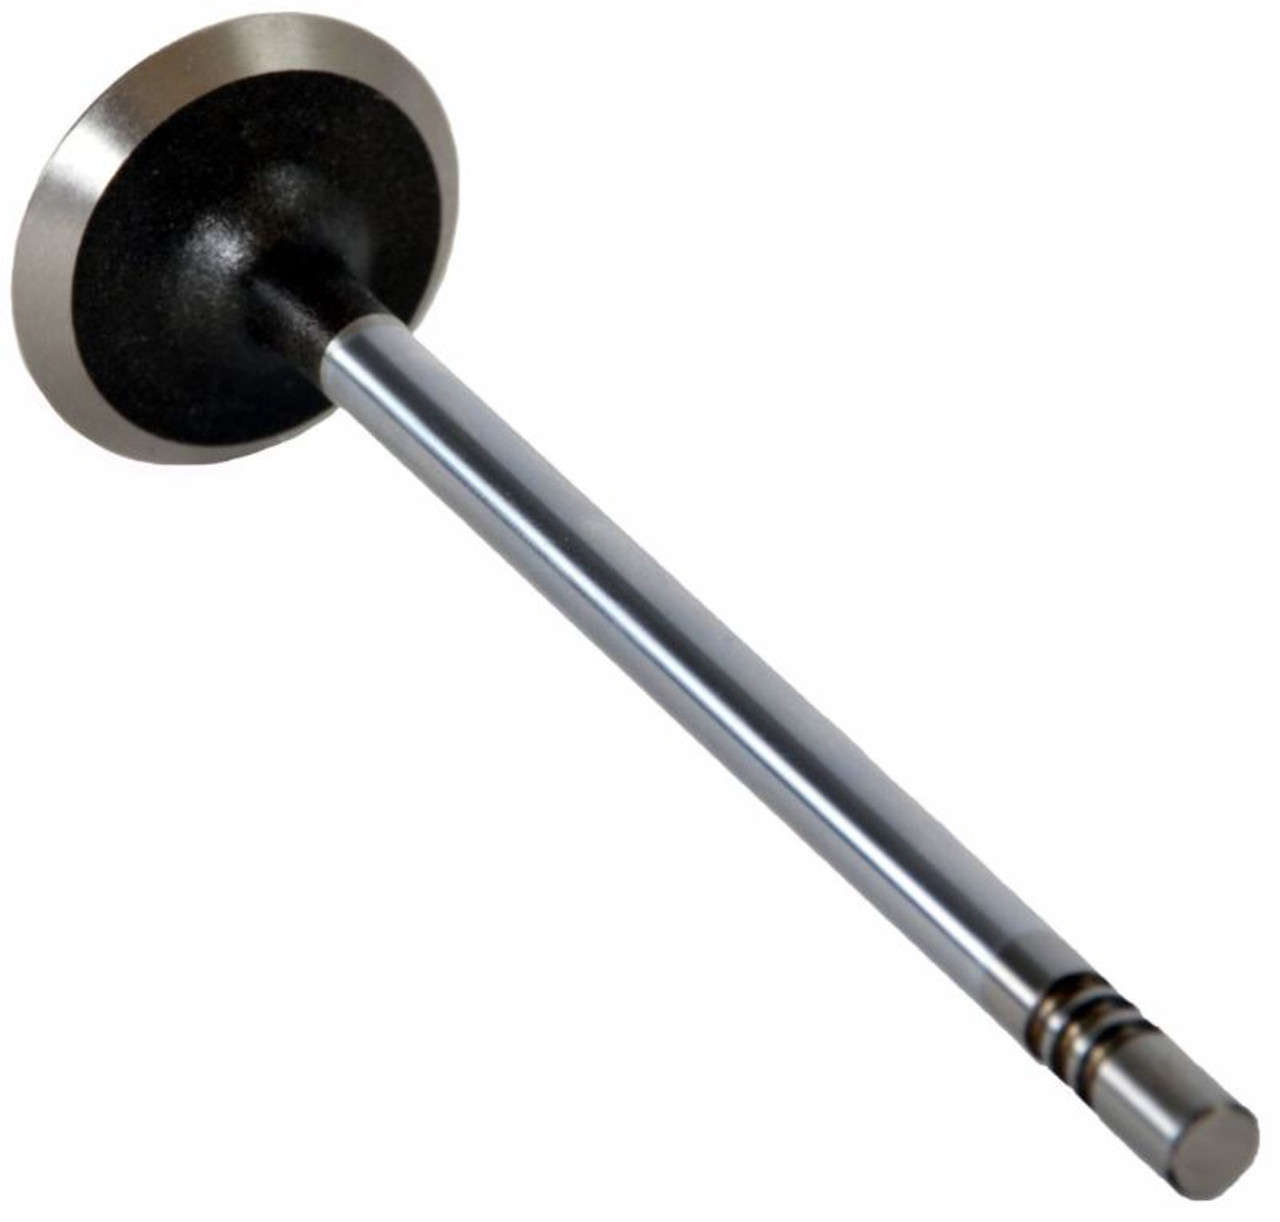 Exhaust Valve - 1996 Ford Taurus 3.0L (V3423.A1)